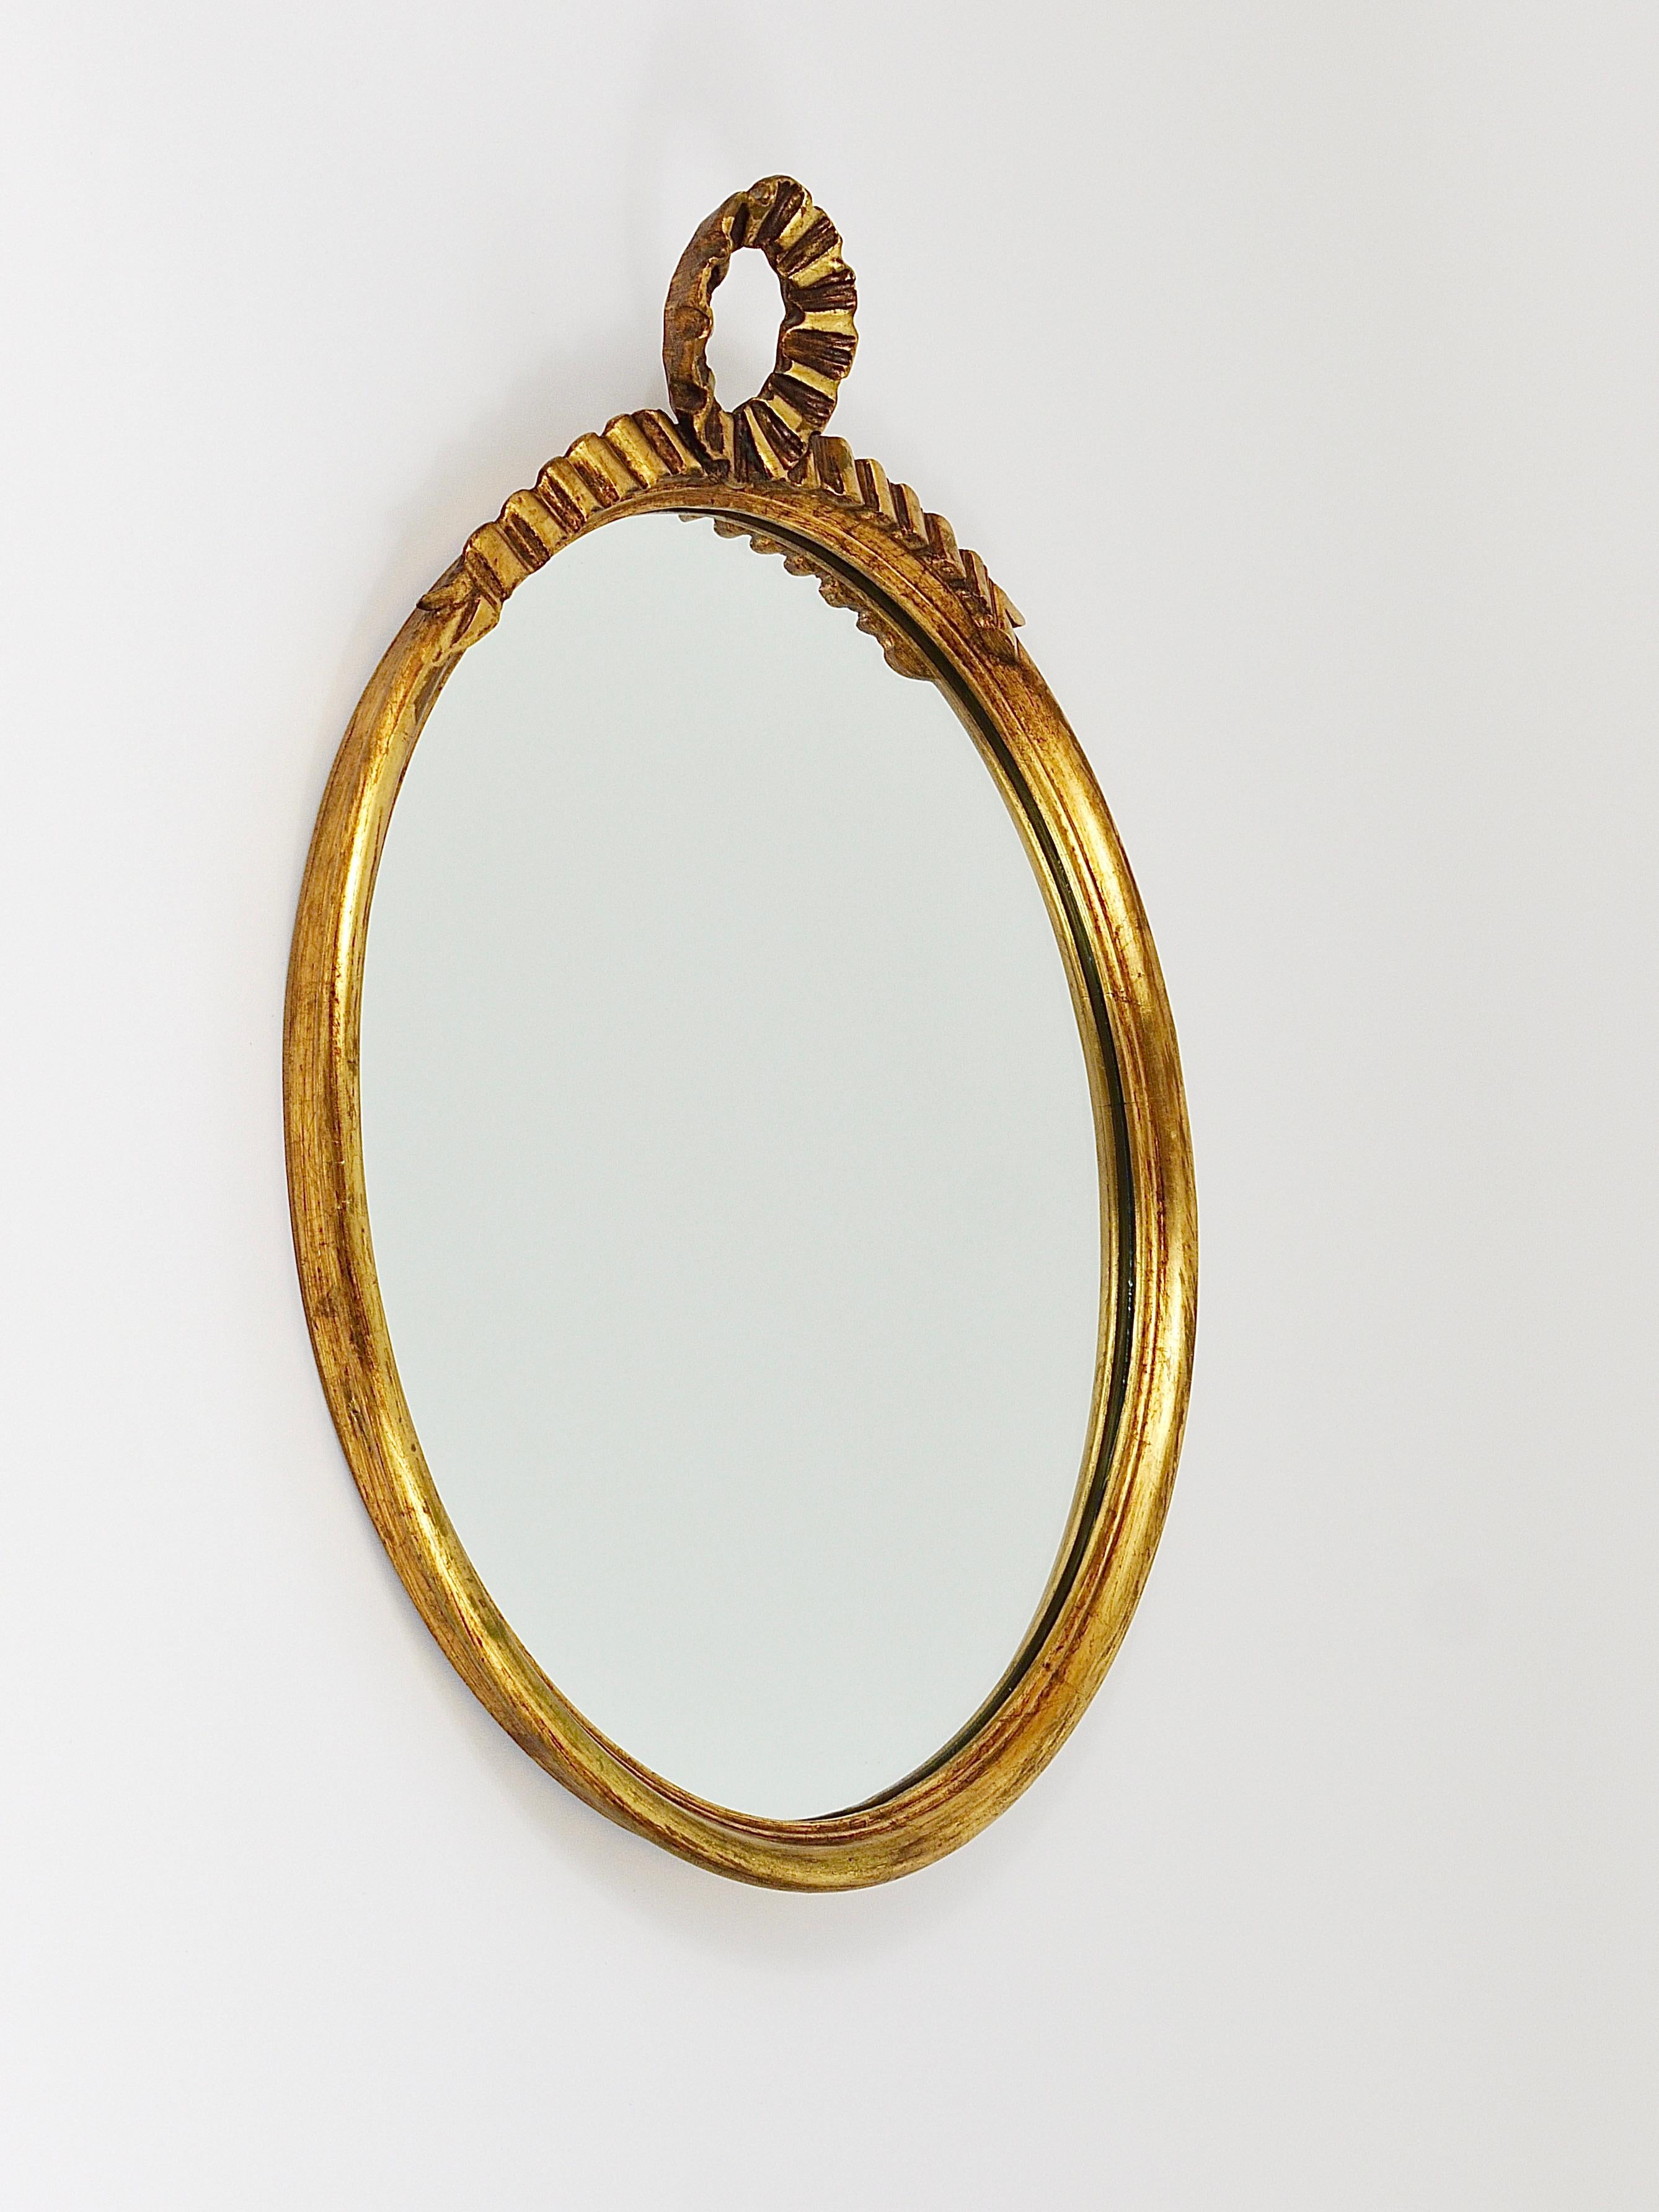 Round Midcentury Gilt Wood Wall Mirror, C. Allodi & G. Subelli, Italy, 1950s For Sale 8